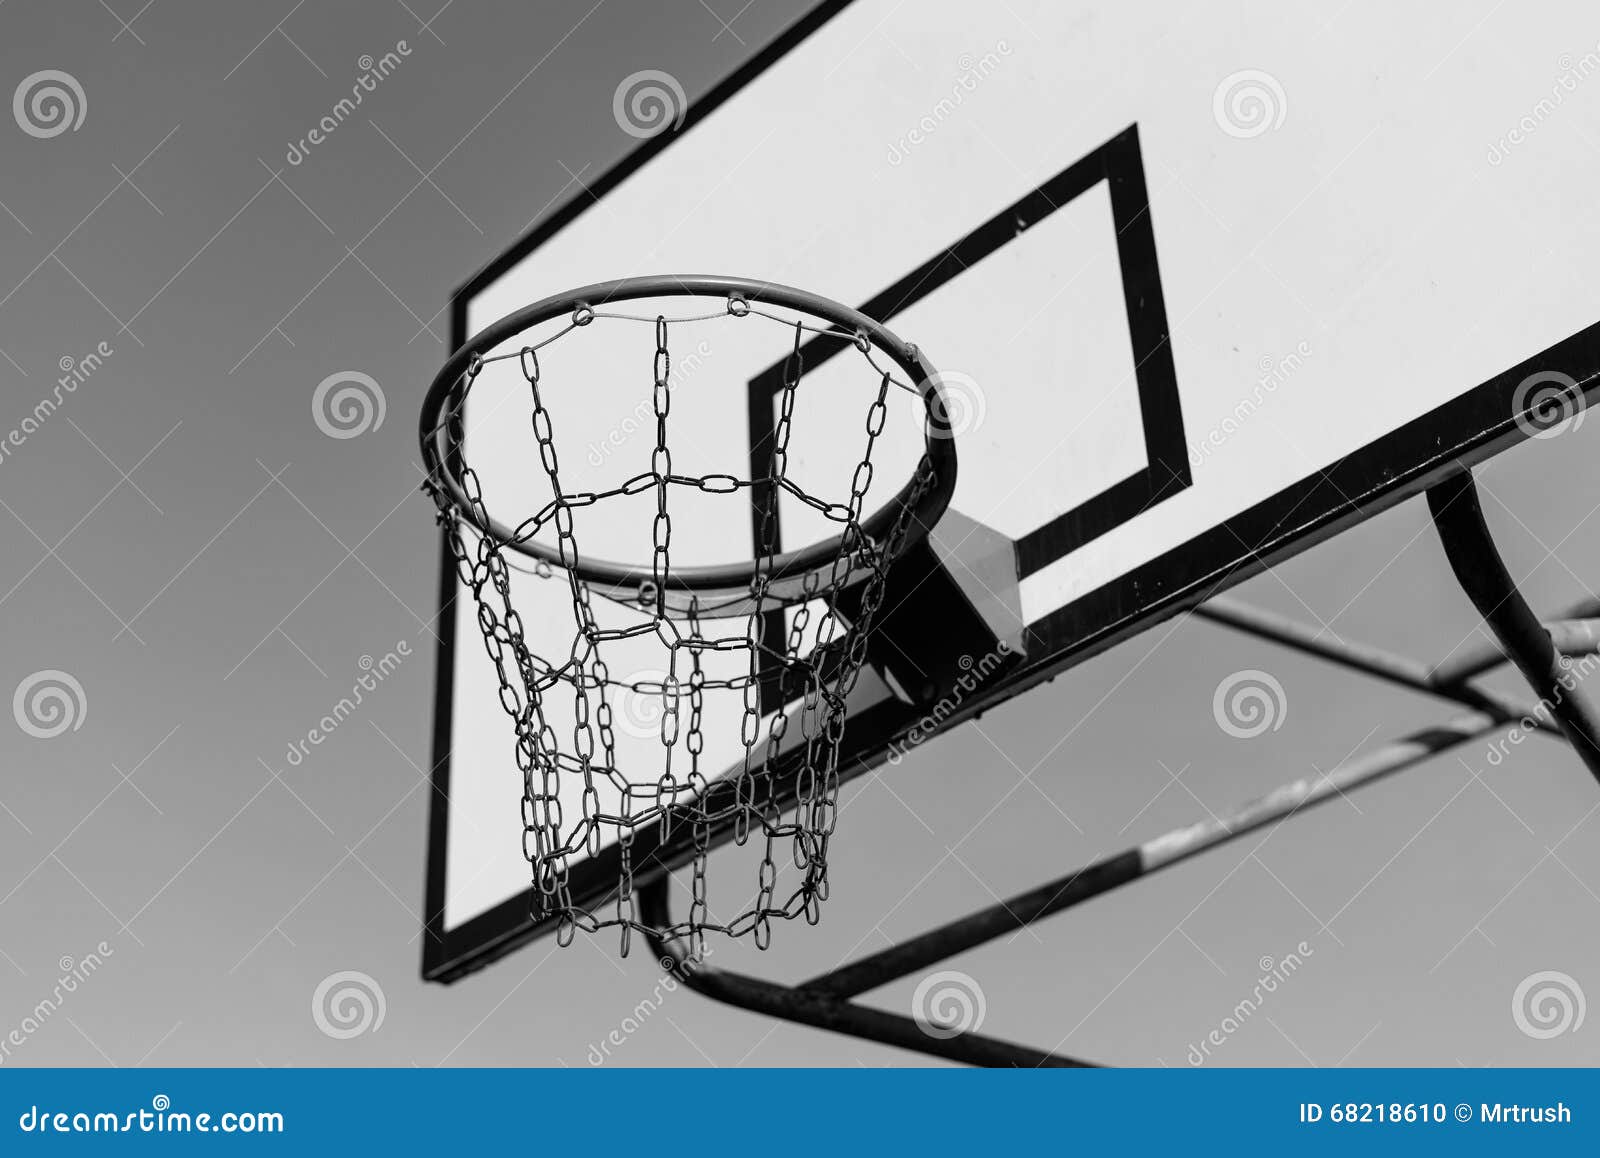 Basketball court and hoop stock photo. Image of defocused - 68218610